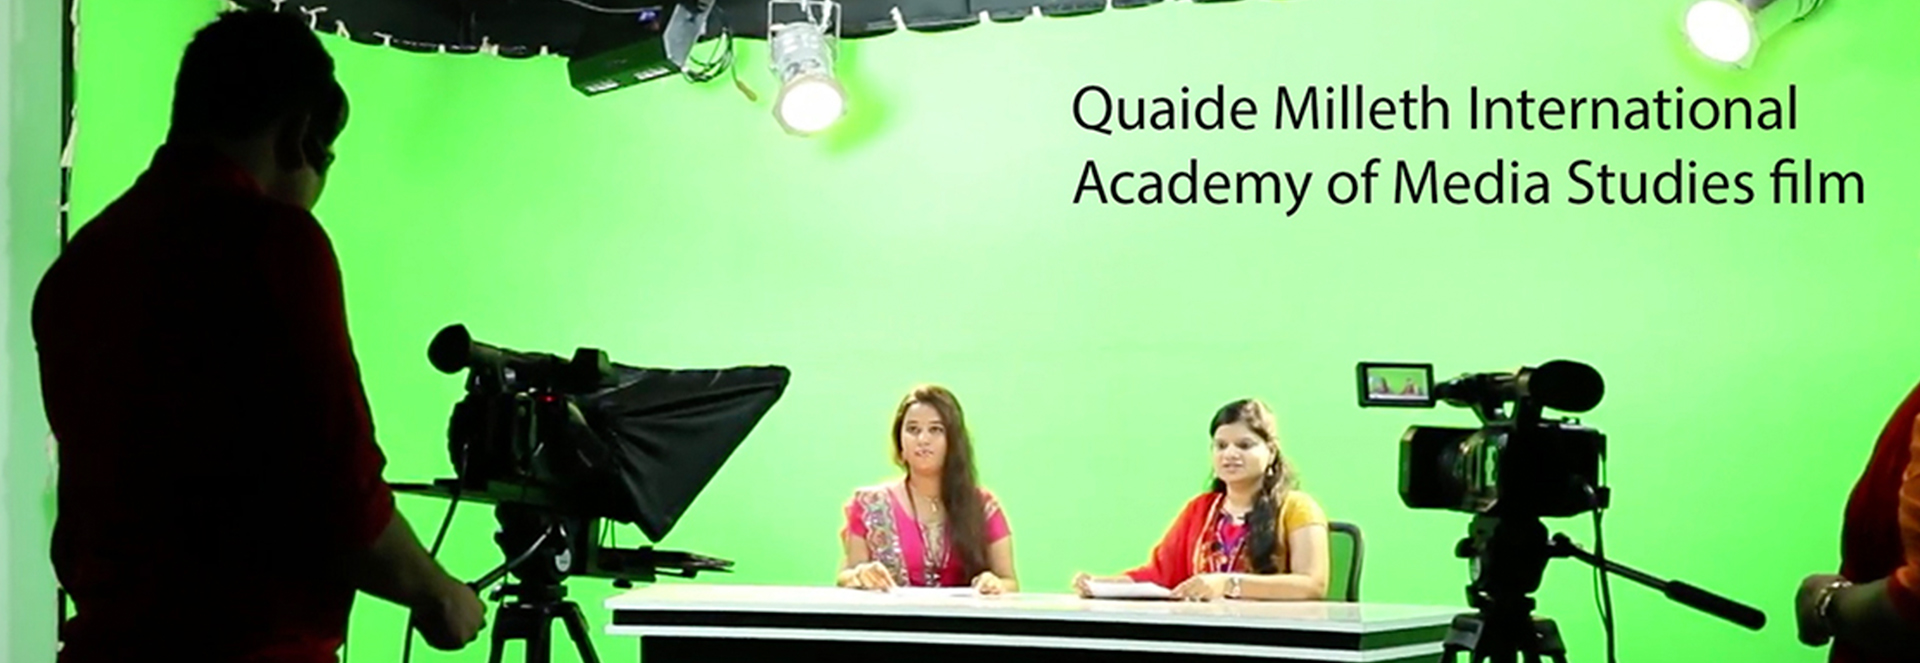 corporate-quaide-milleth-academy-films